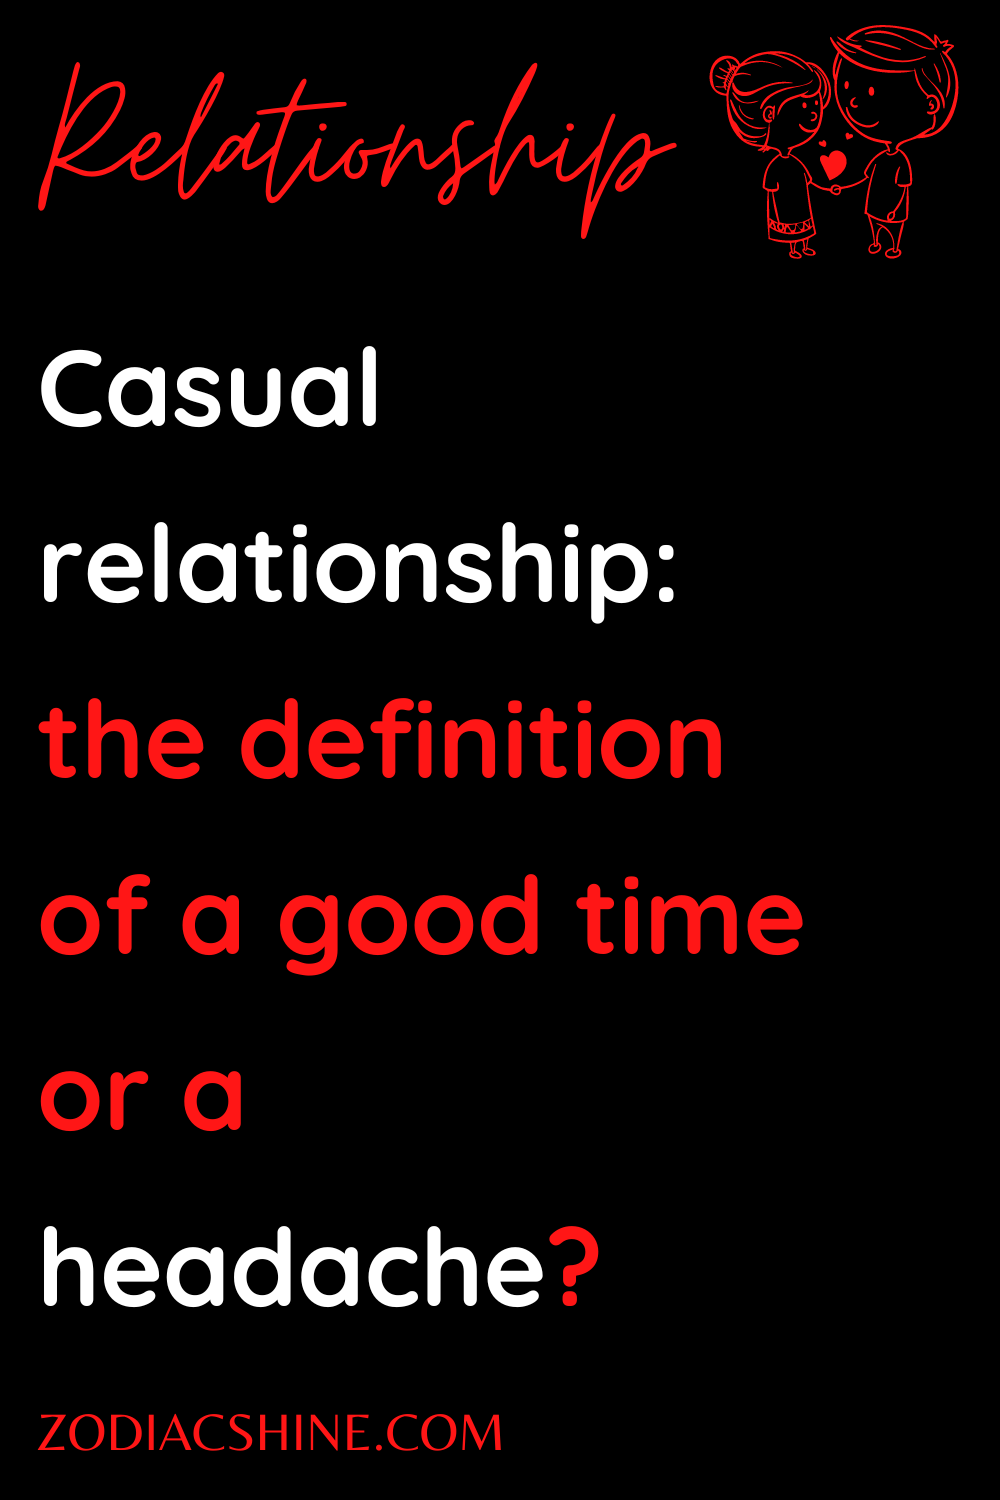 Casual relationship: the definition of a good time or a headache?